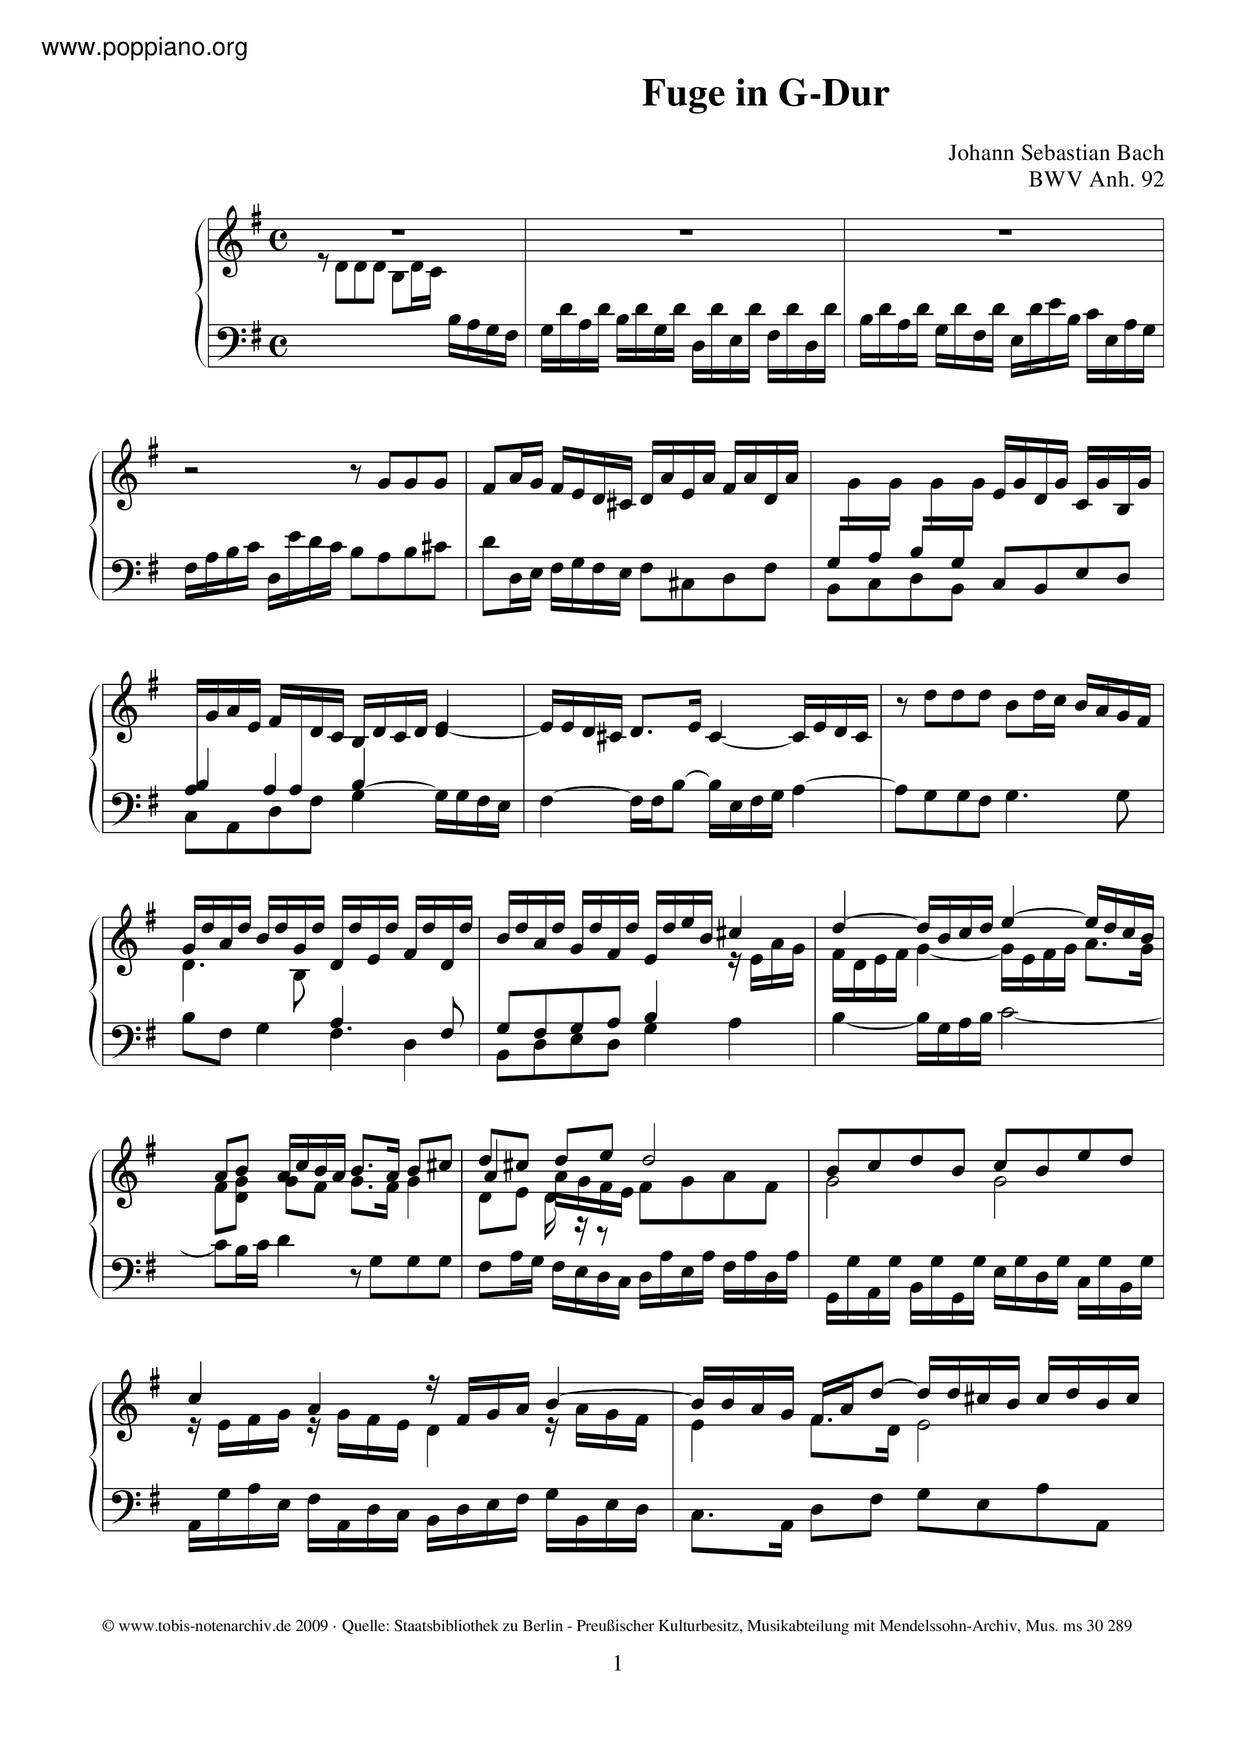 Fugue In G Major, BWV Anh. 92 Score